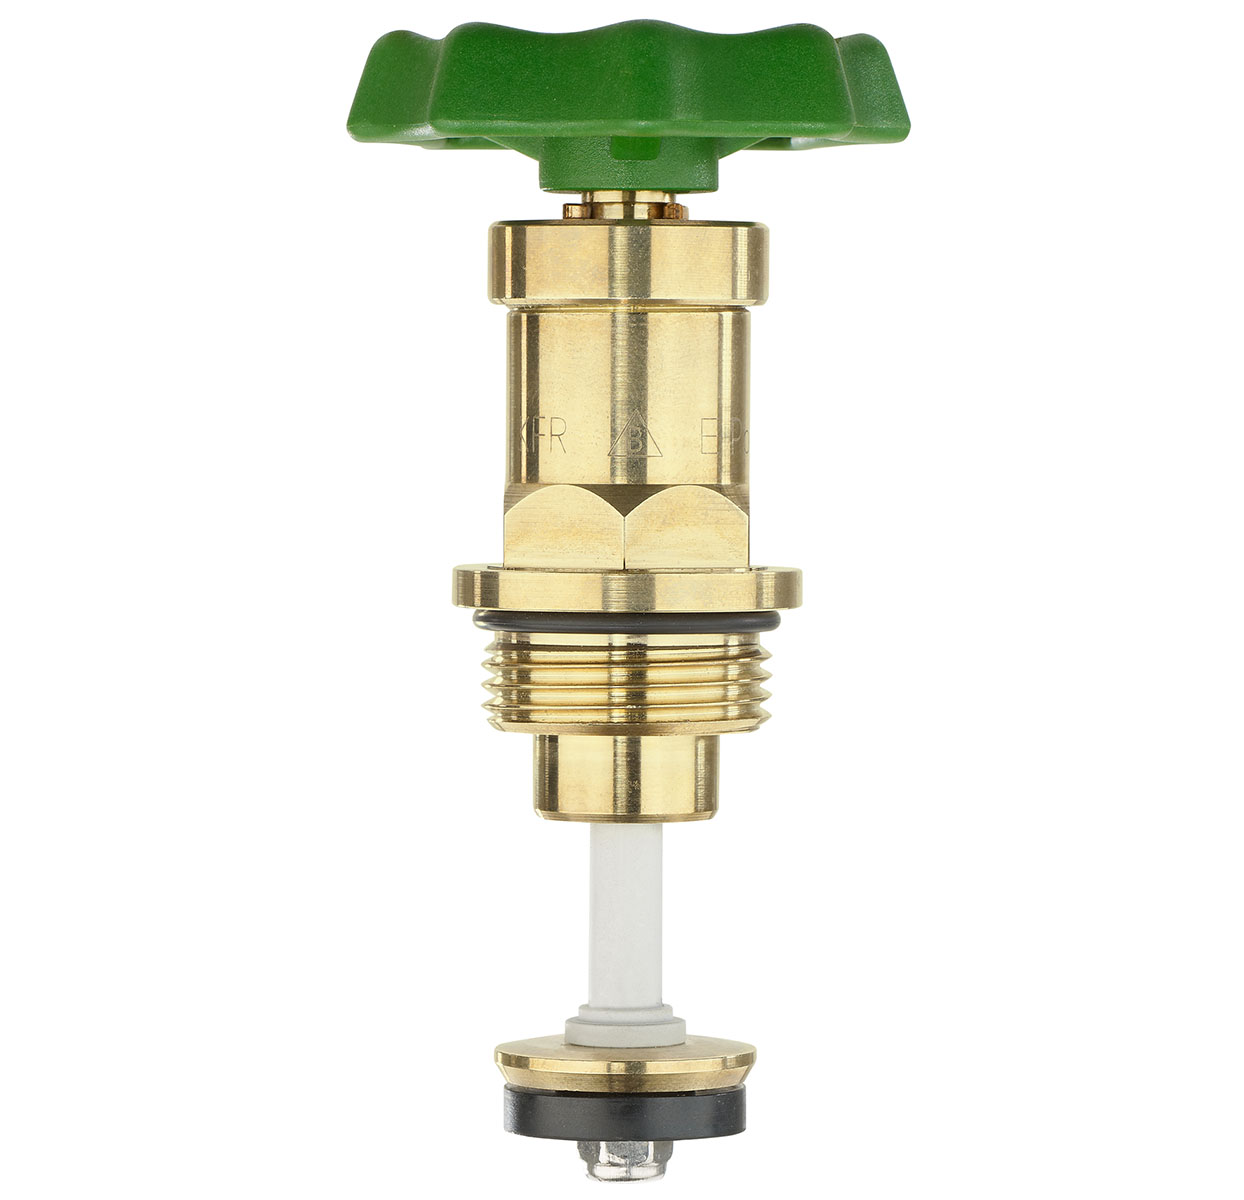 1275200 - Cuphin Upper-part with grease chamber SOFT-drive-system, for Combined Free-flow and Backflow-preventer valves, not-rising spindle